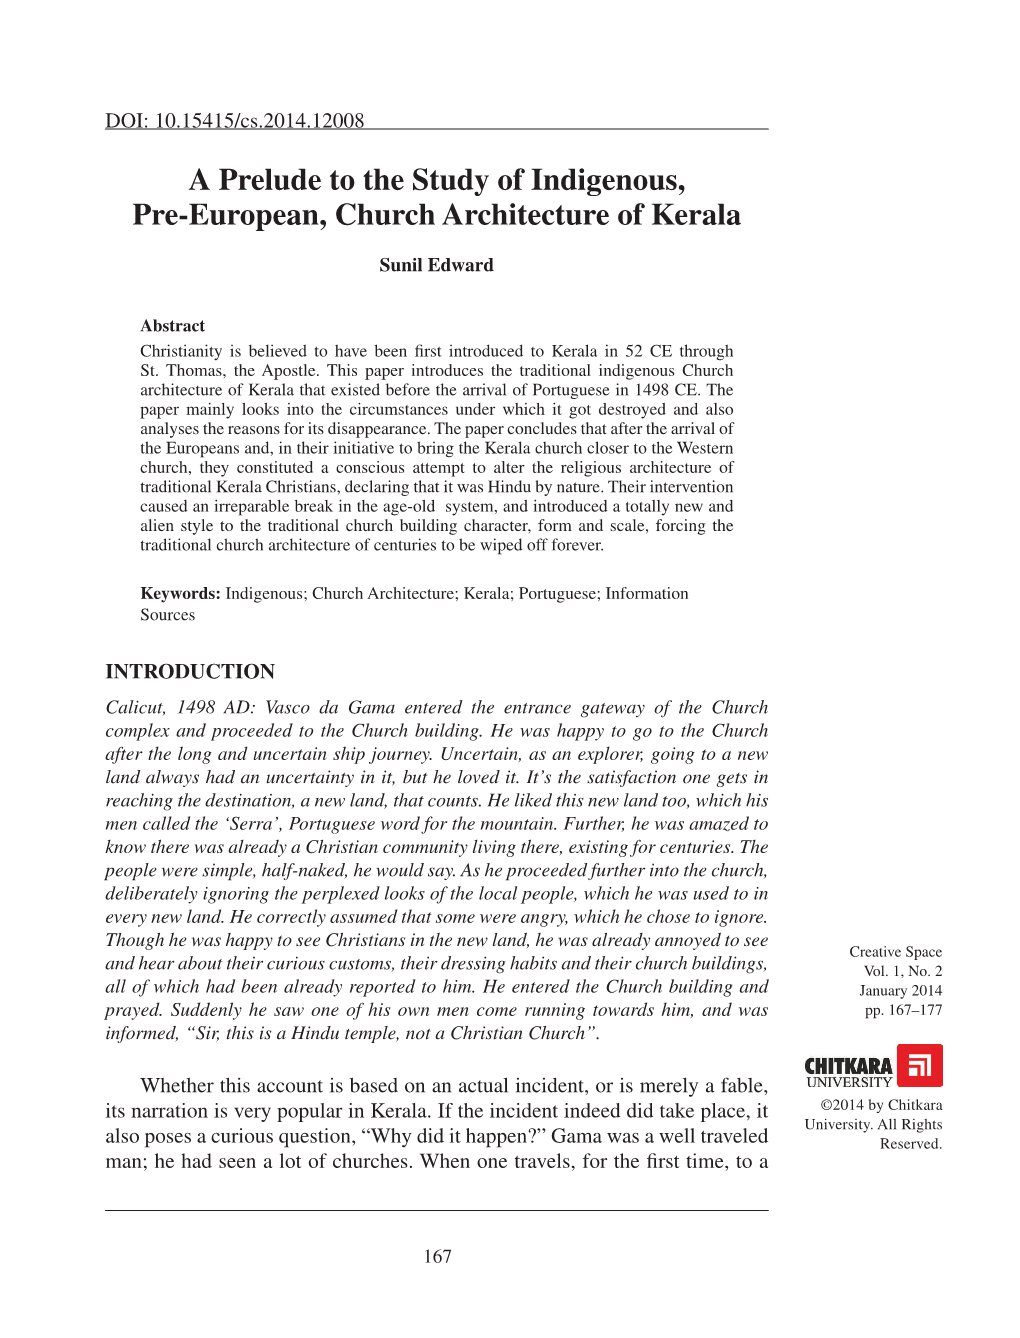 A Prelude to the Study of Indigenous, Pre-European, Church Architecture of Kerala